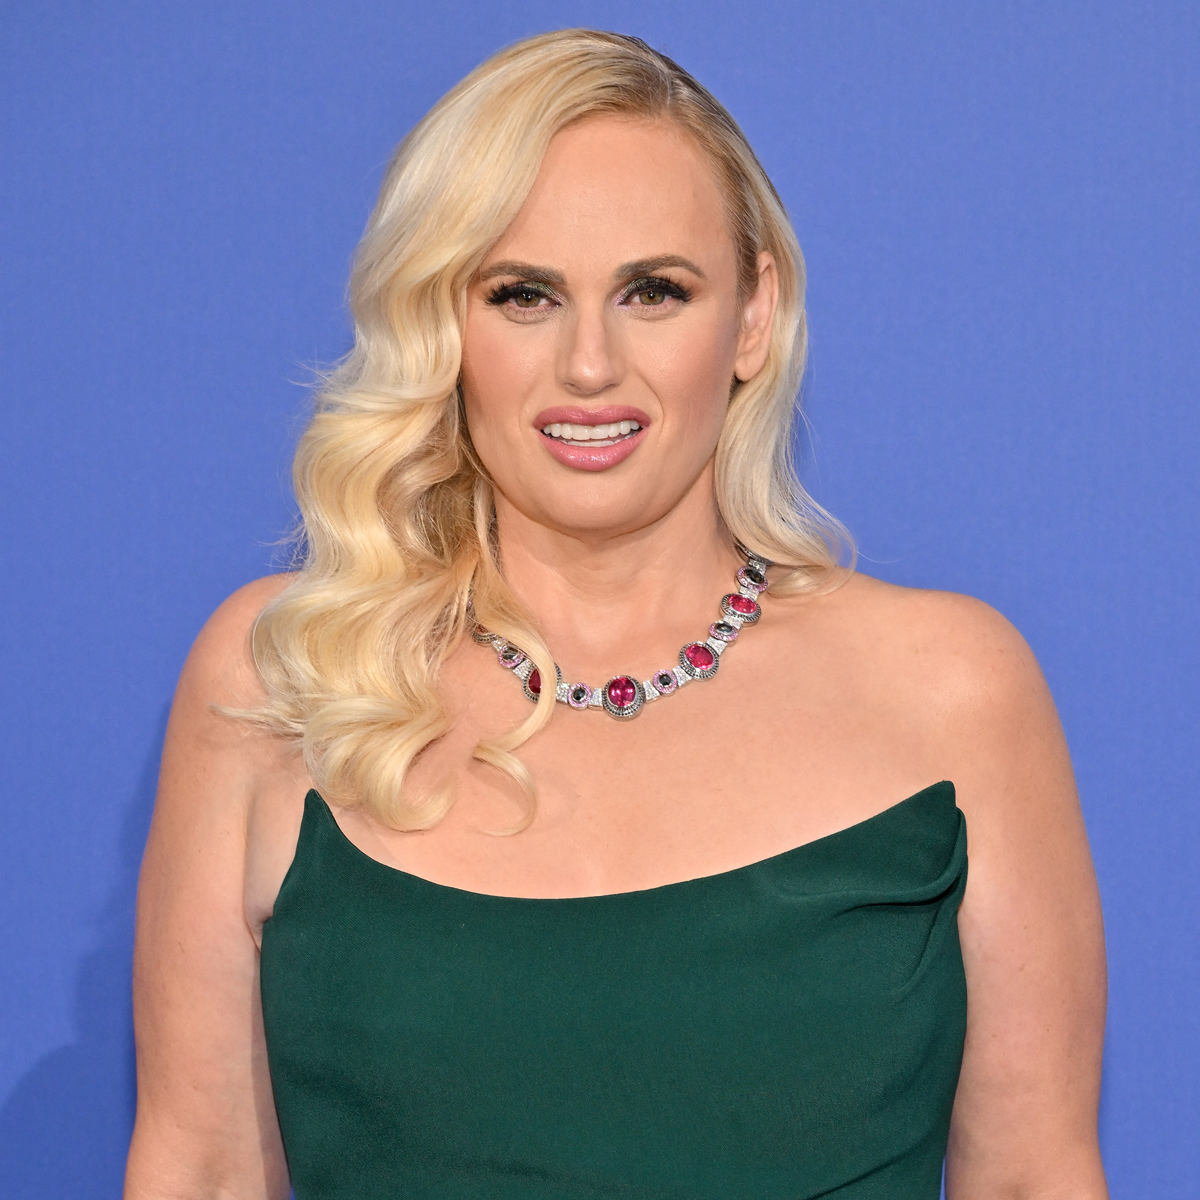 Rebel Wilson Details Memories of a Wild Party With Unnamed Royal Family Member